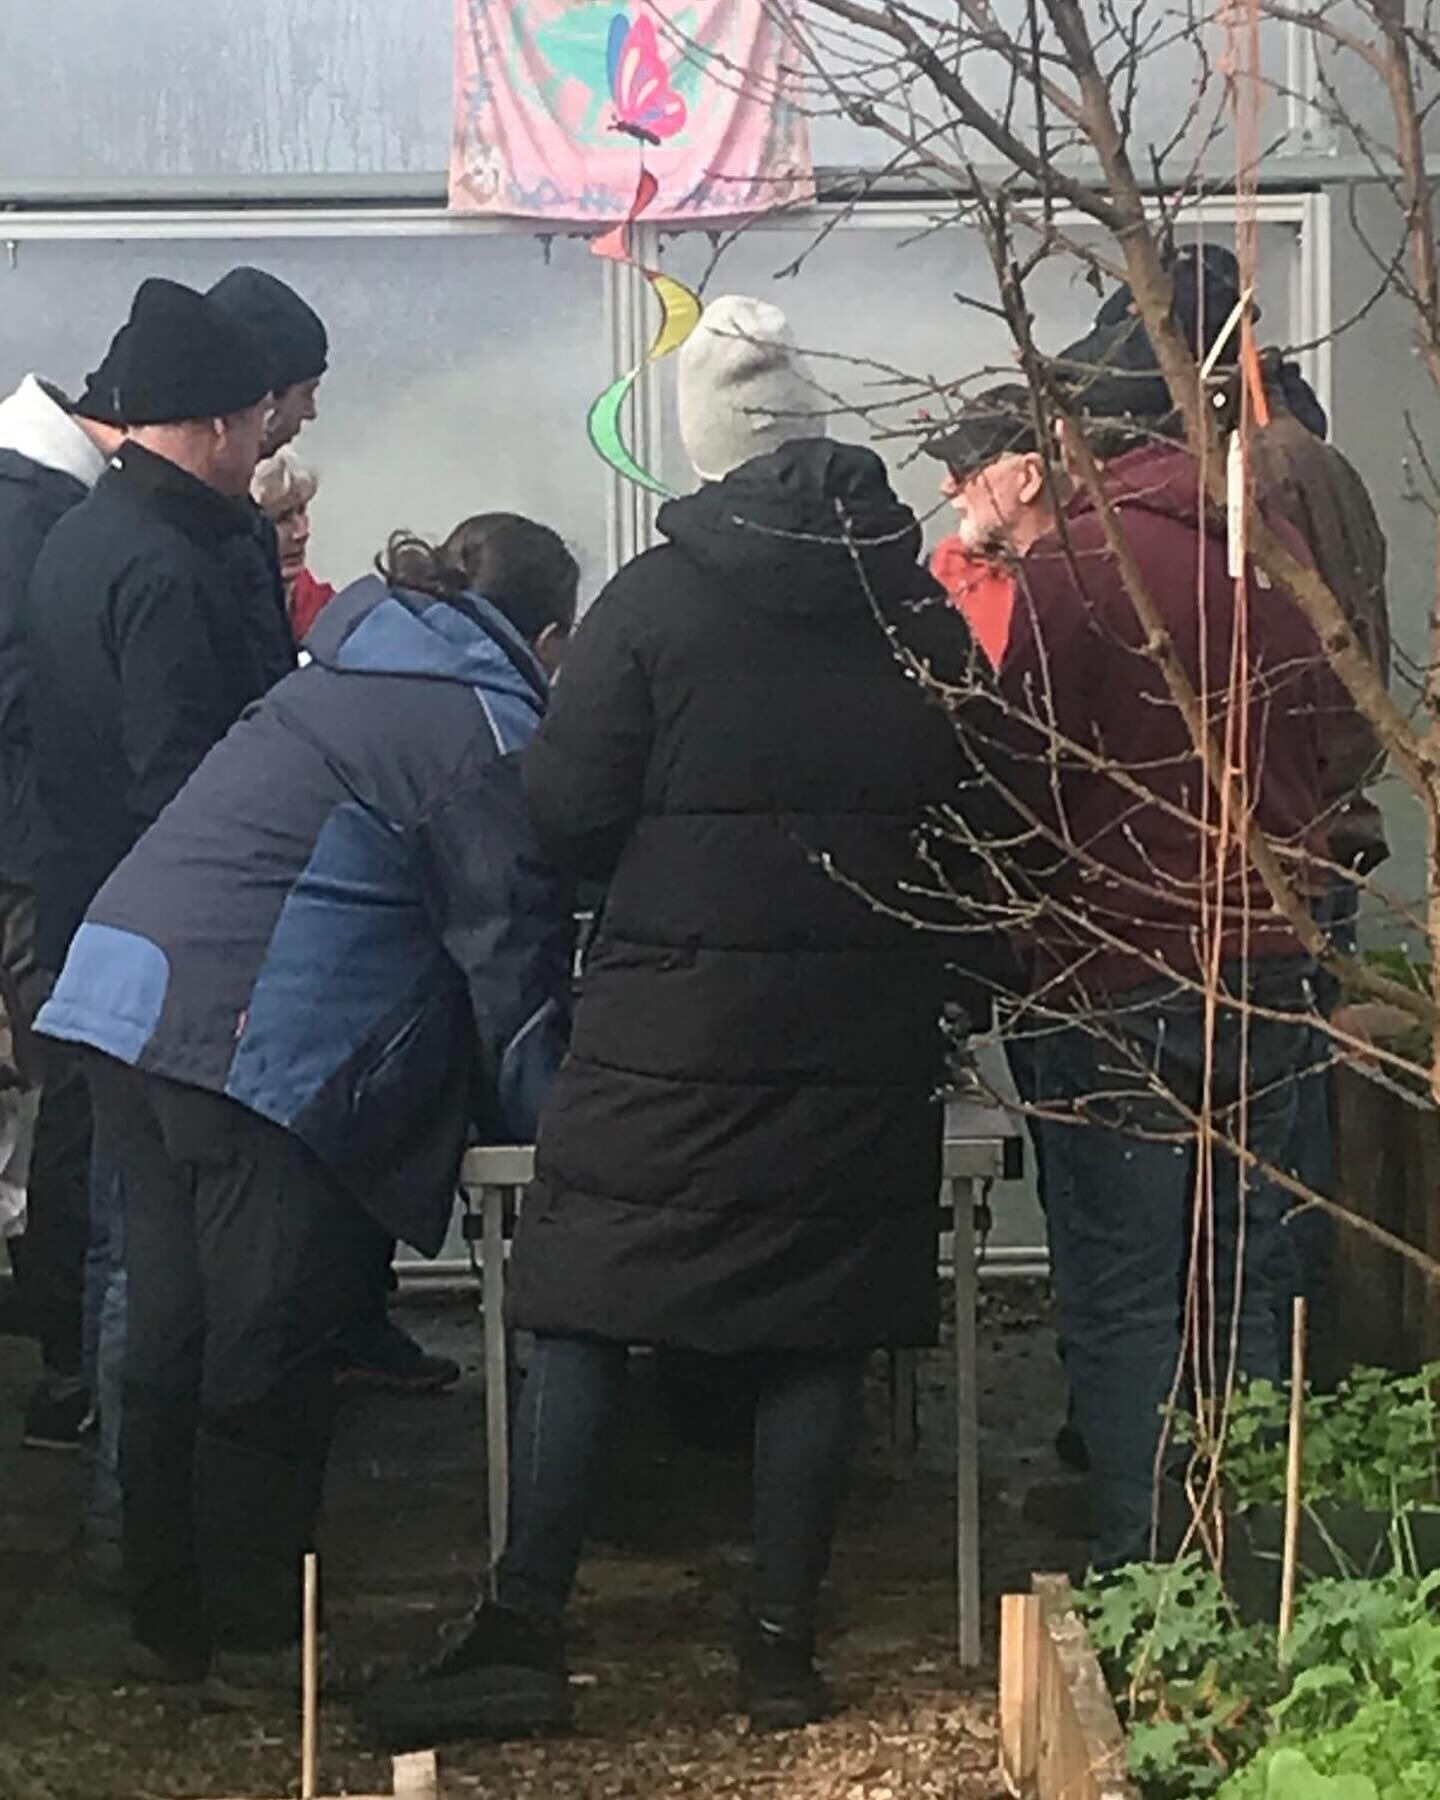 Busy Saturday in the polytunnel at Neantog. The interest in growing your own food is ever increasing and it&rsquo;s great to be a part of that movement and are able to inspire people to start their own polytunnel experience.
#polytunnels #selfsuffici